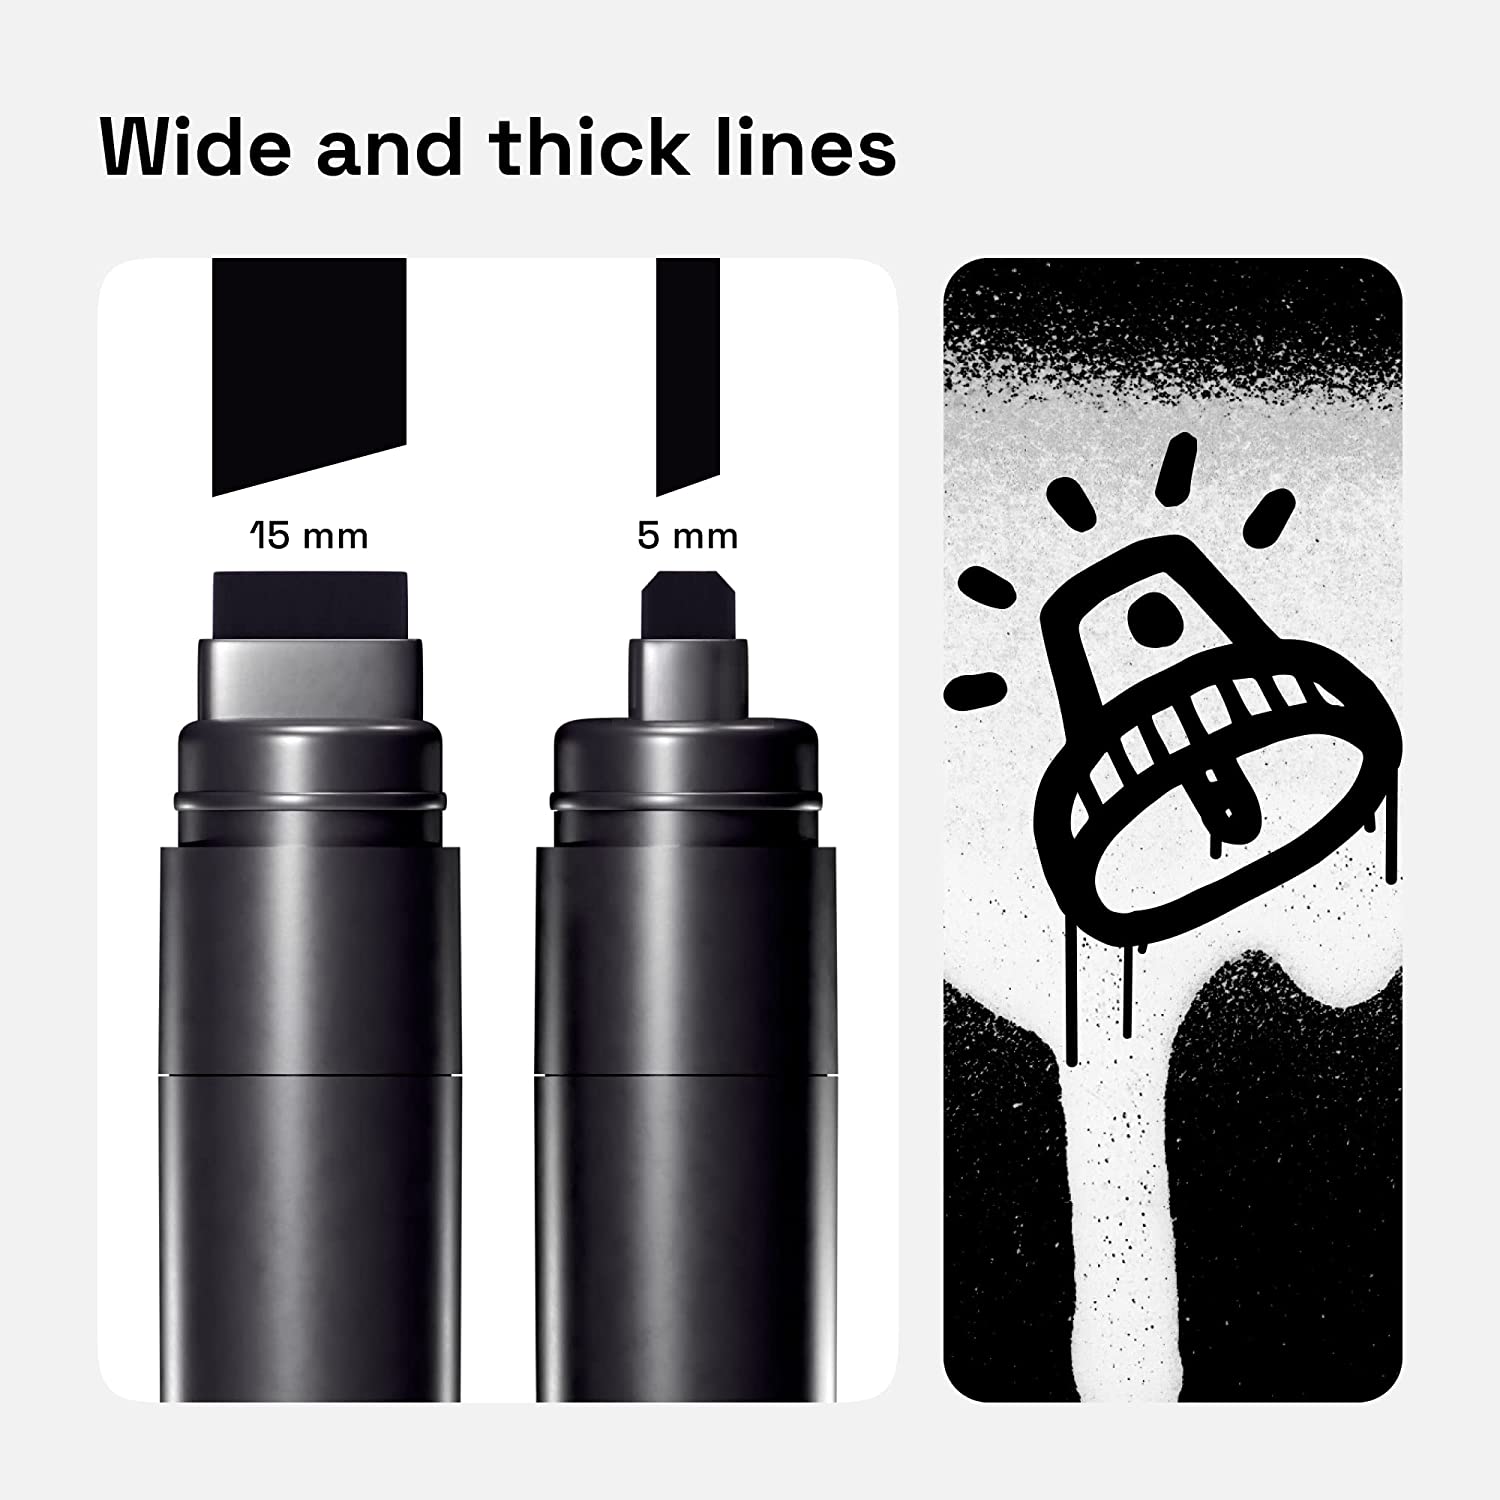 jumbo tip has wide and thick lines 